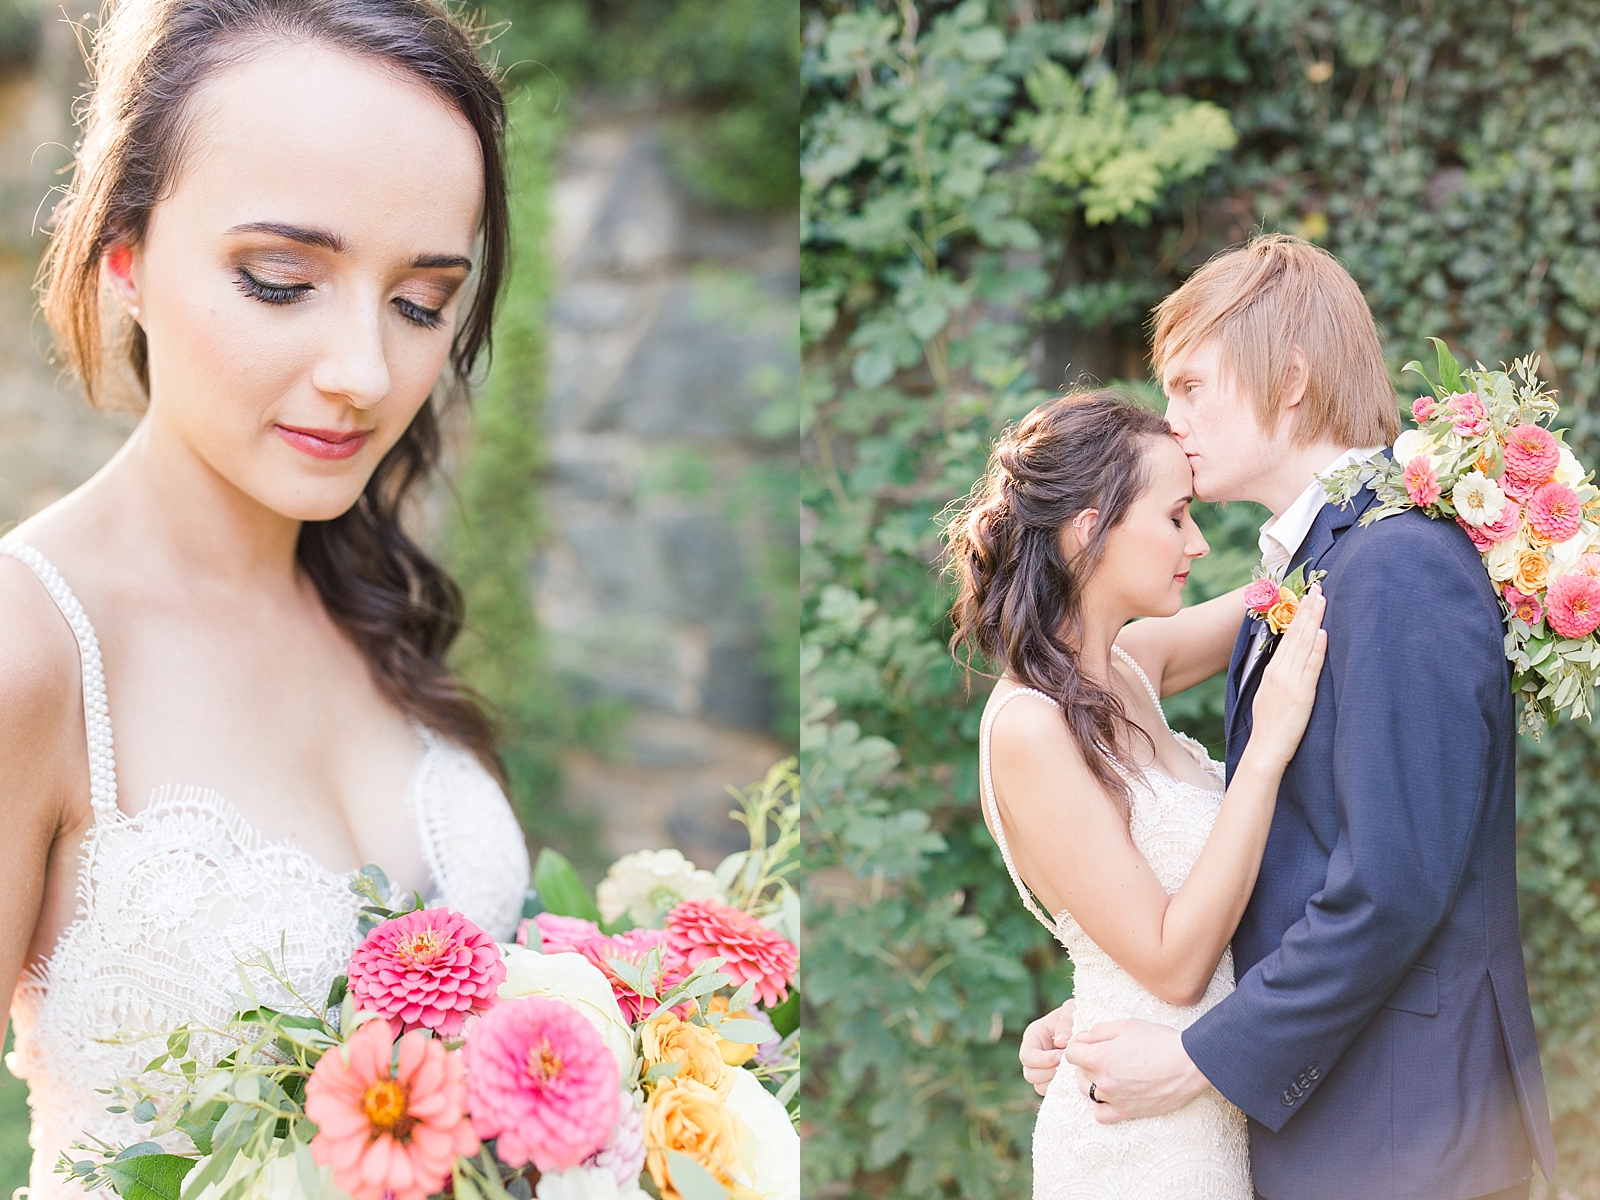 Atlanta Georgia Elopement Bride looking down at bouquet with pink flowers and groom kissing bride on the forehead Photos